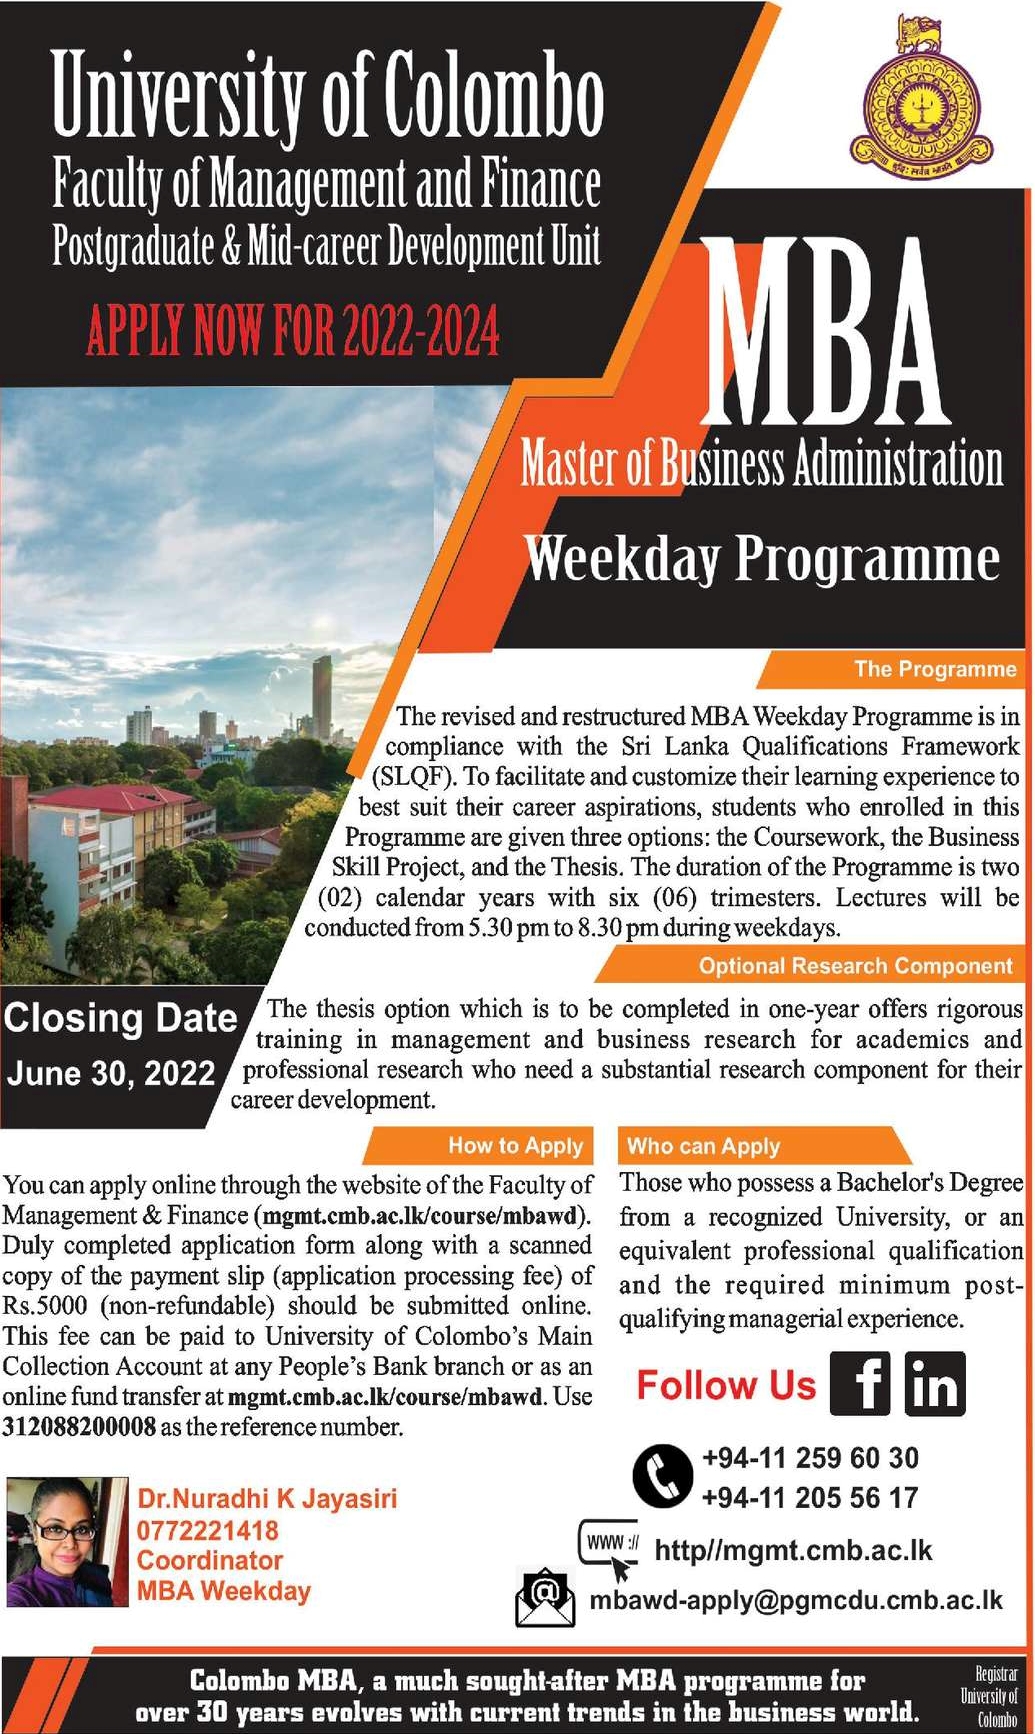 MBA Master of Business Administration Weekday Programme - University of Colombo Jobs Vacancies